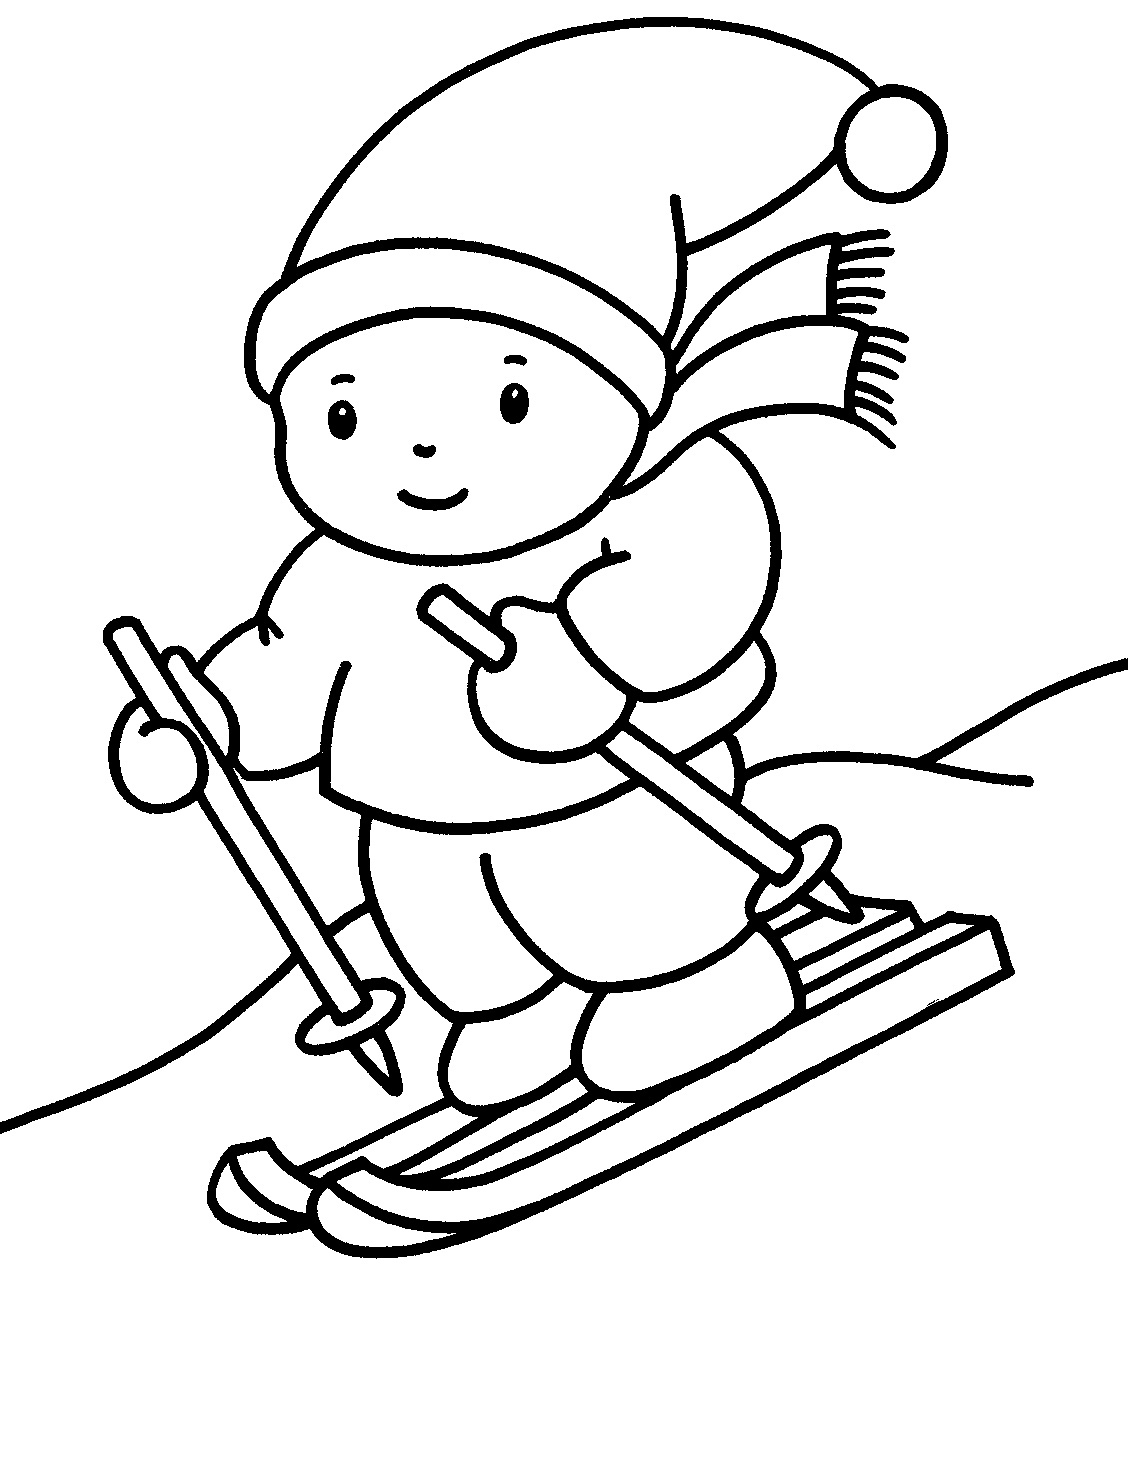 Christmas Sled drawing and coloring page